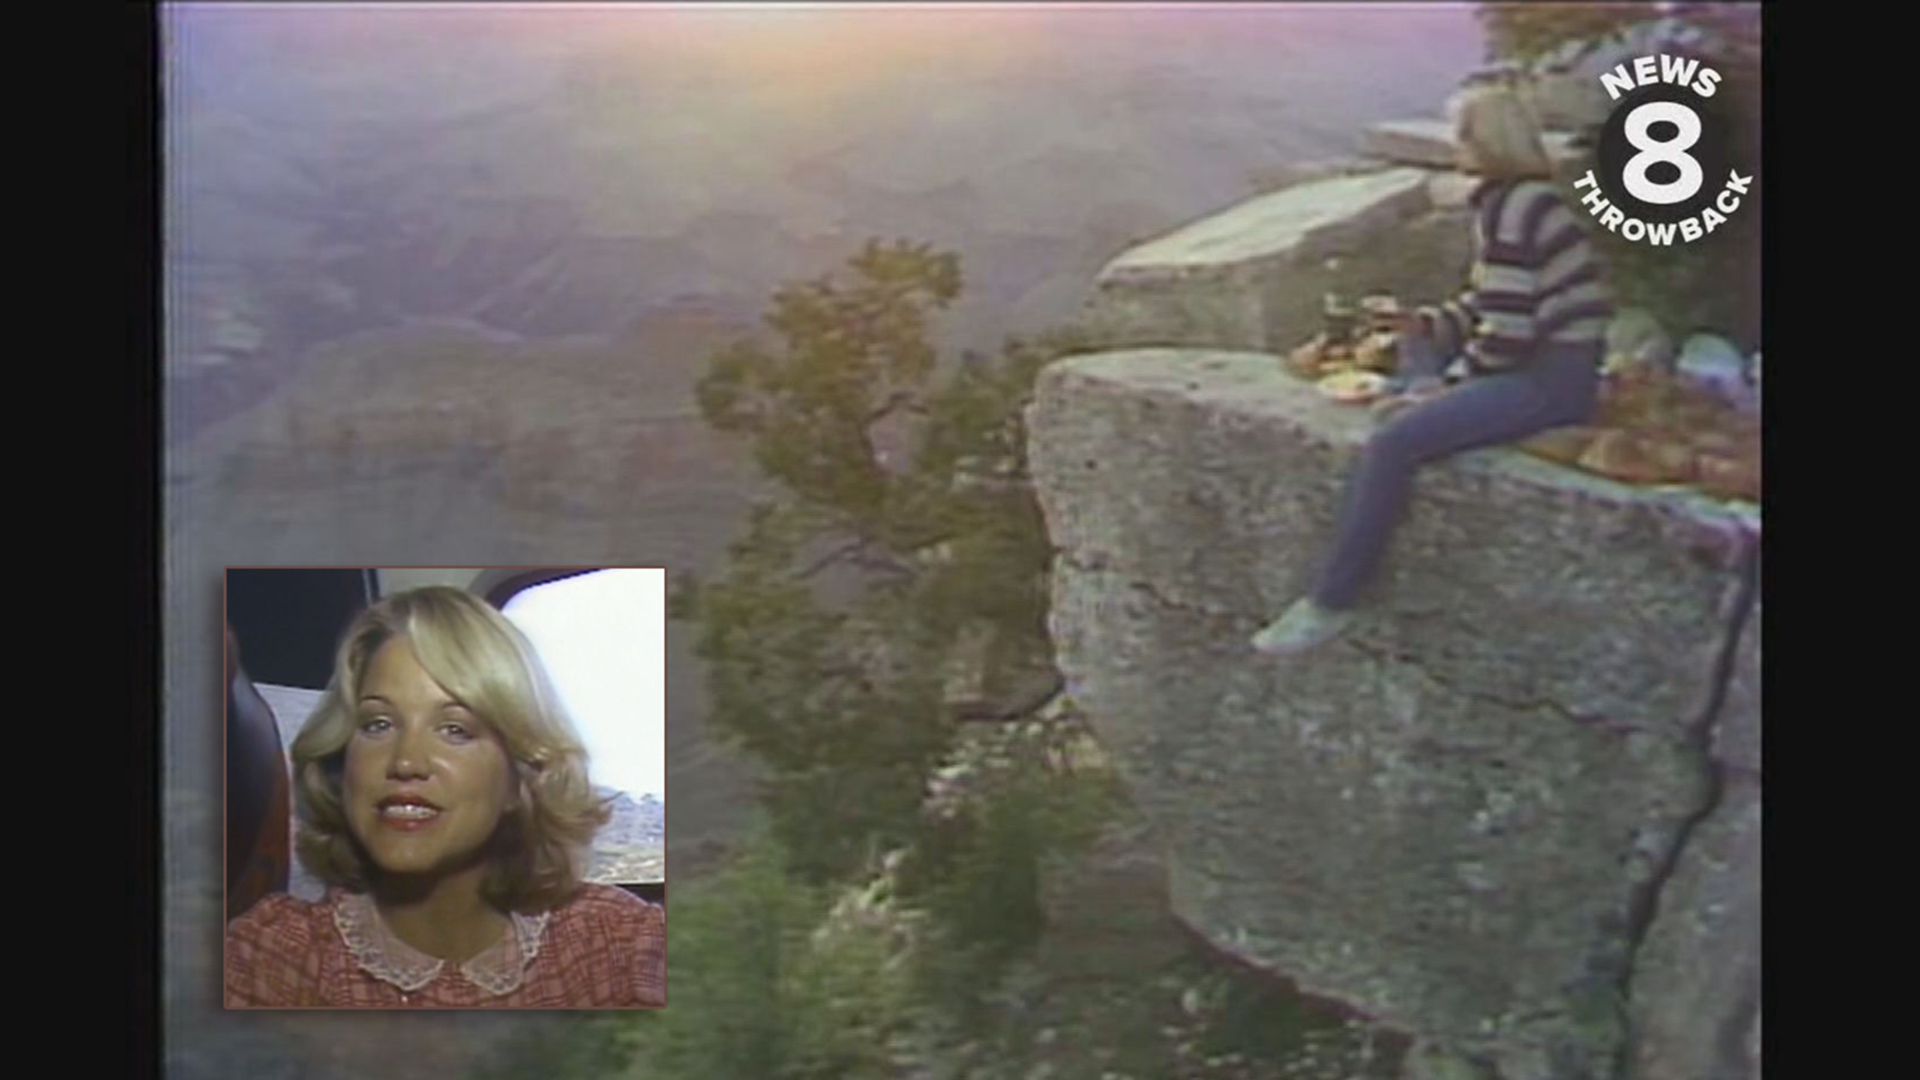 The first in a four-part series unearthed from the News 8 archives takes us on a summer travel showcase with then local reporter Paula Zahn in 1980.